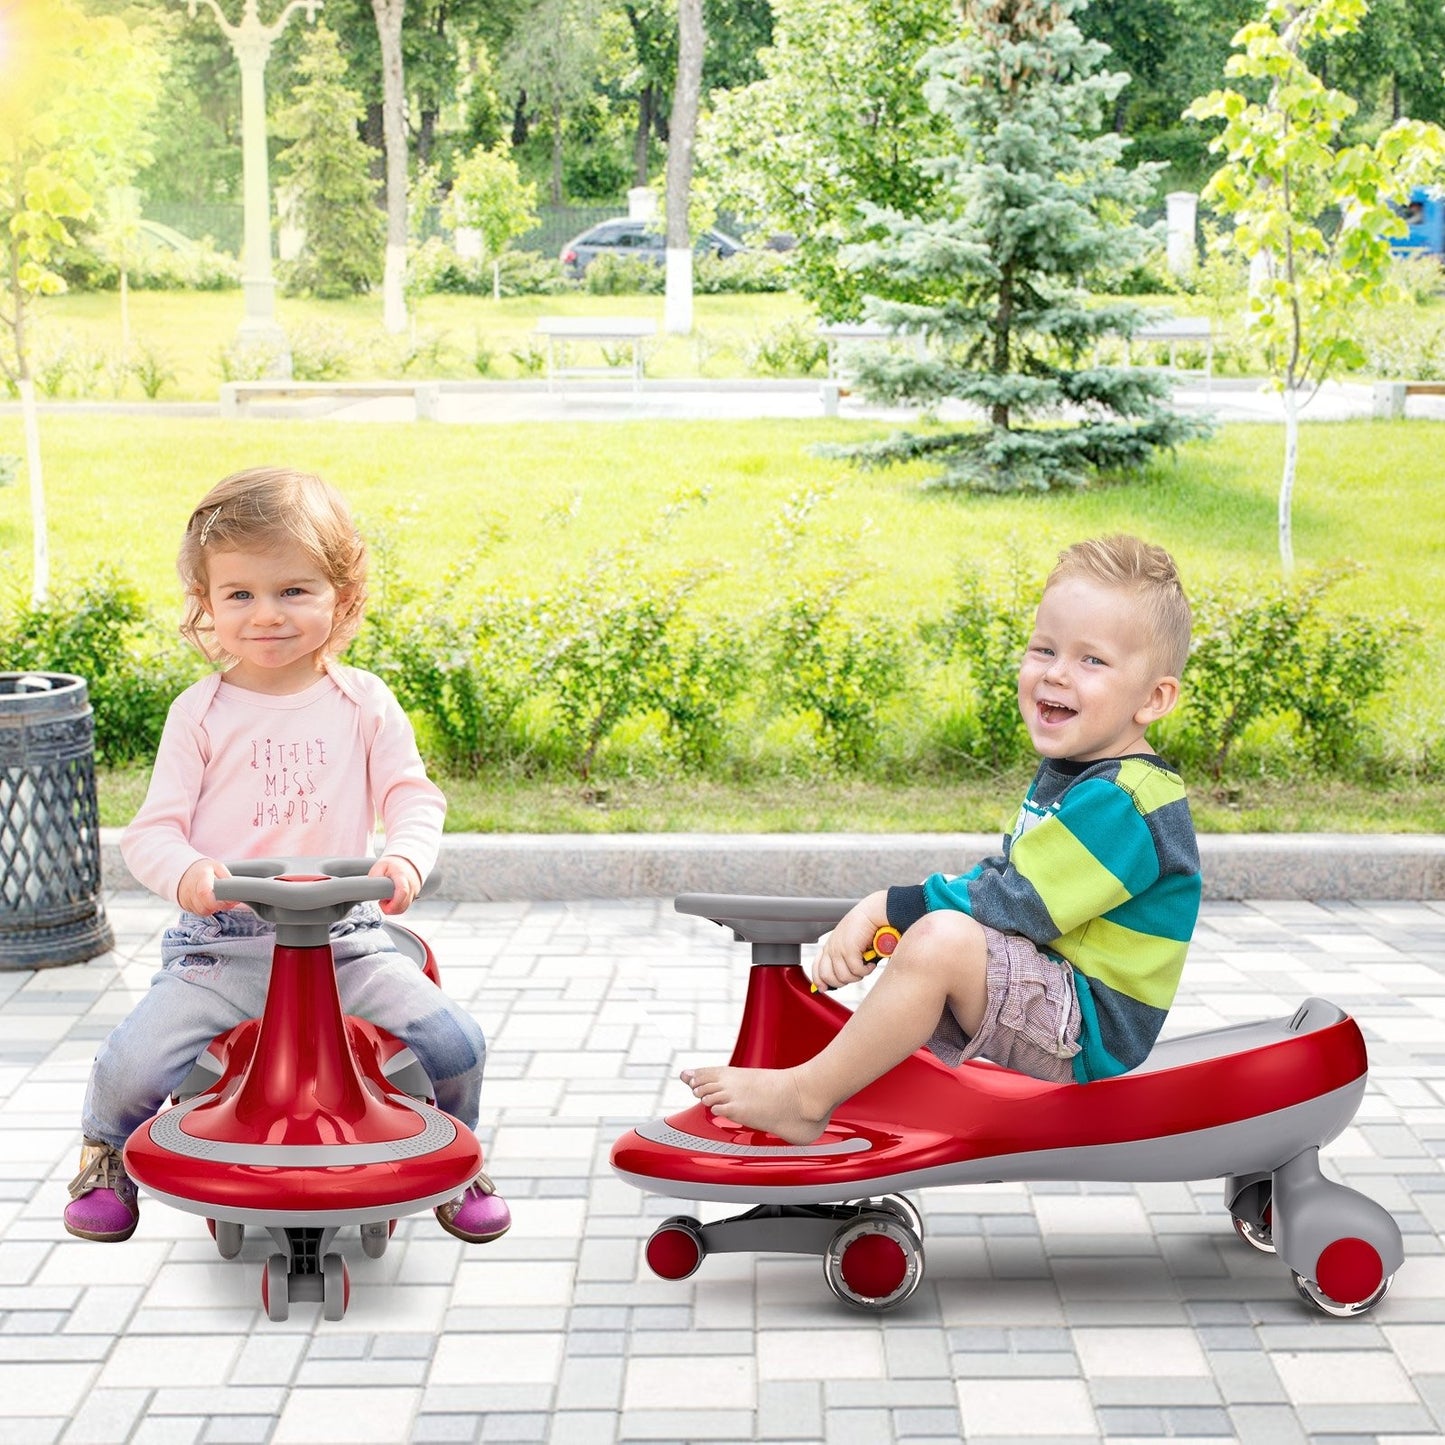 Wiggle Car Ride-on Toy with Flashing Wheels, Red at Gallery Canada